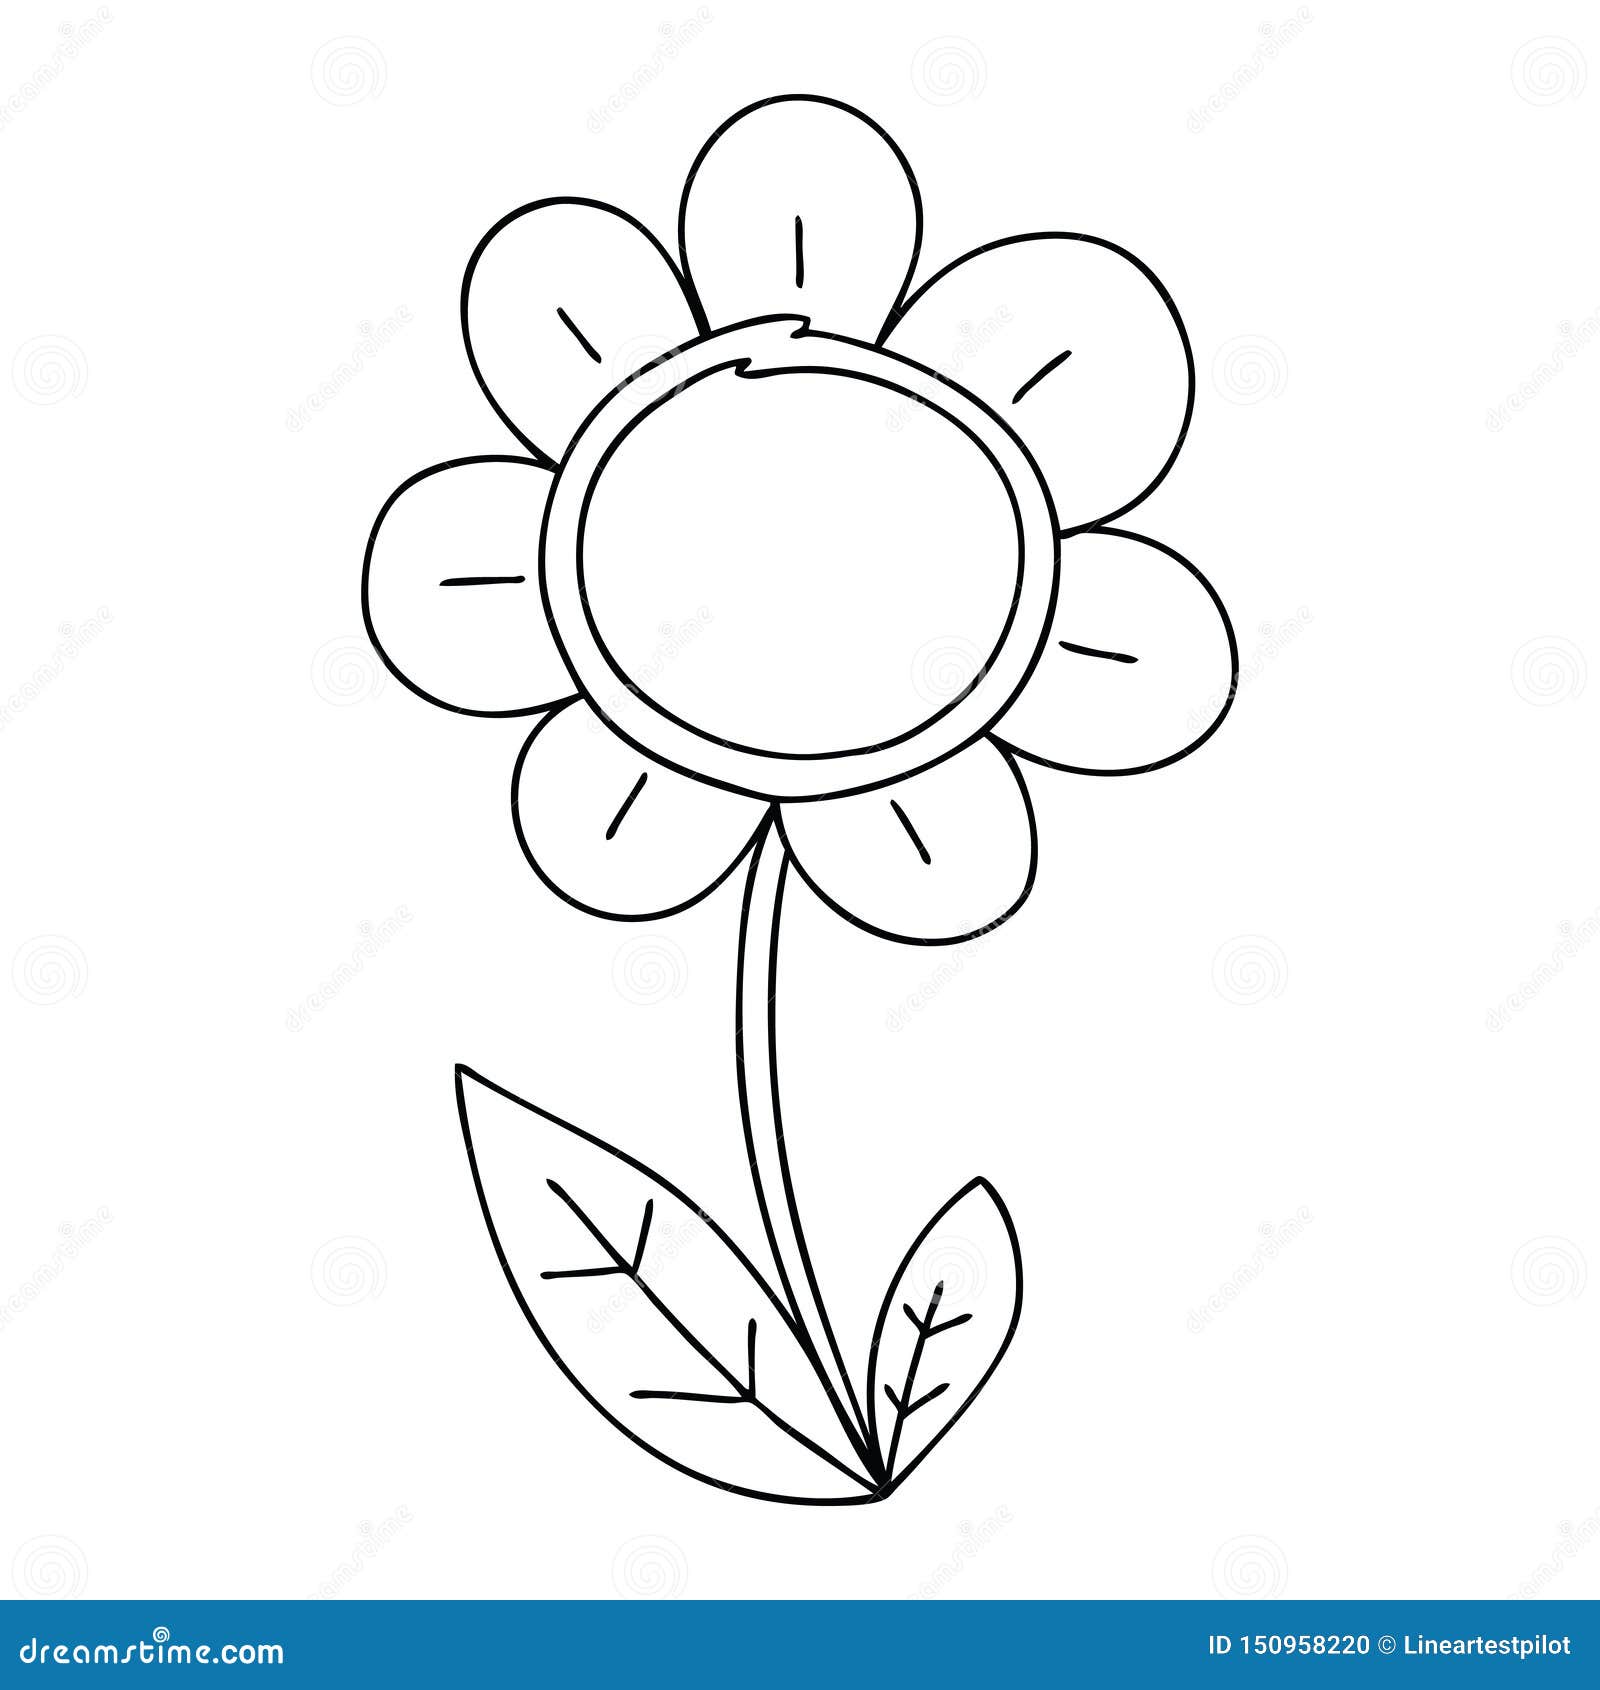 Daisy Flower Garden Object Cute Cartoon Character Doodle Drawing  Illustration Art Artwork Funny Crazy Quirky Vector Stock Illustrations – 11  Daisy Flower Garden Object Cute Cartoon Character Doodle Drawing  Illustration Art Artwork